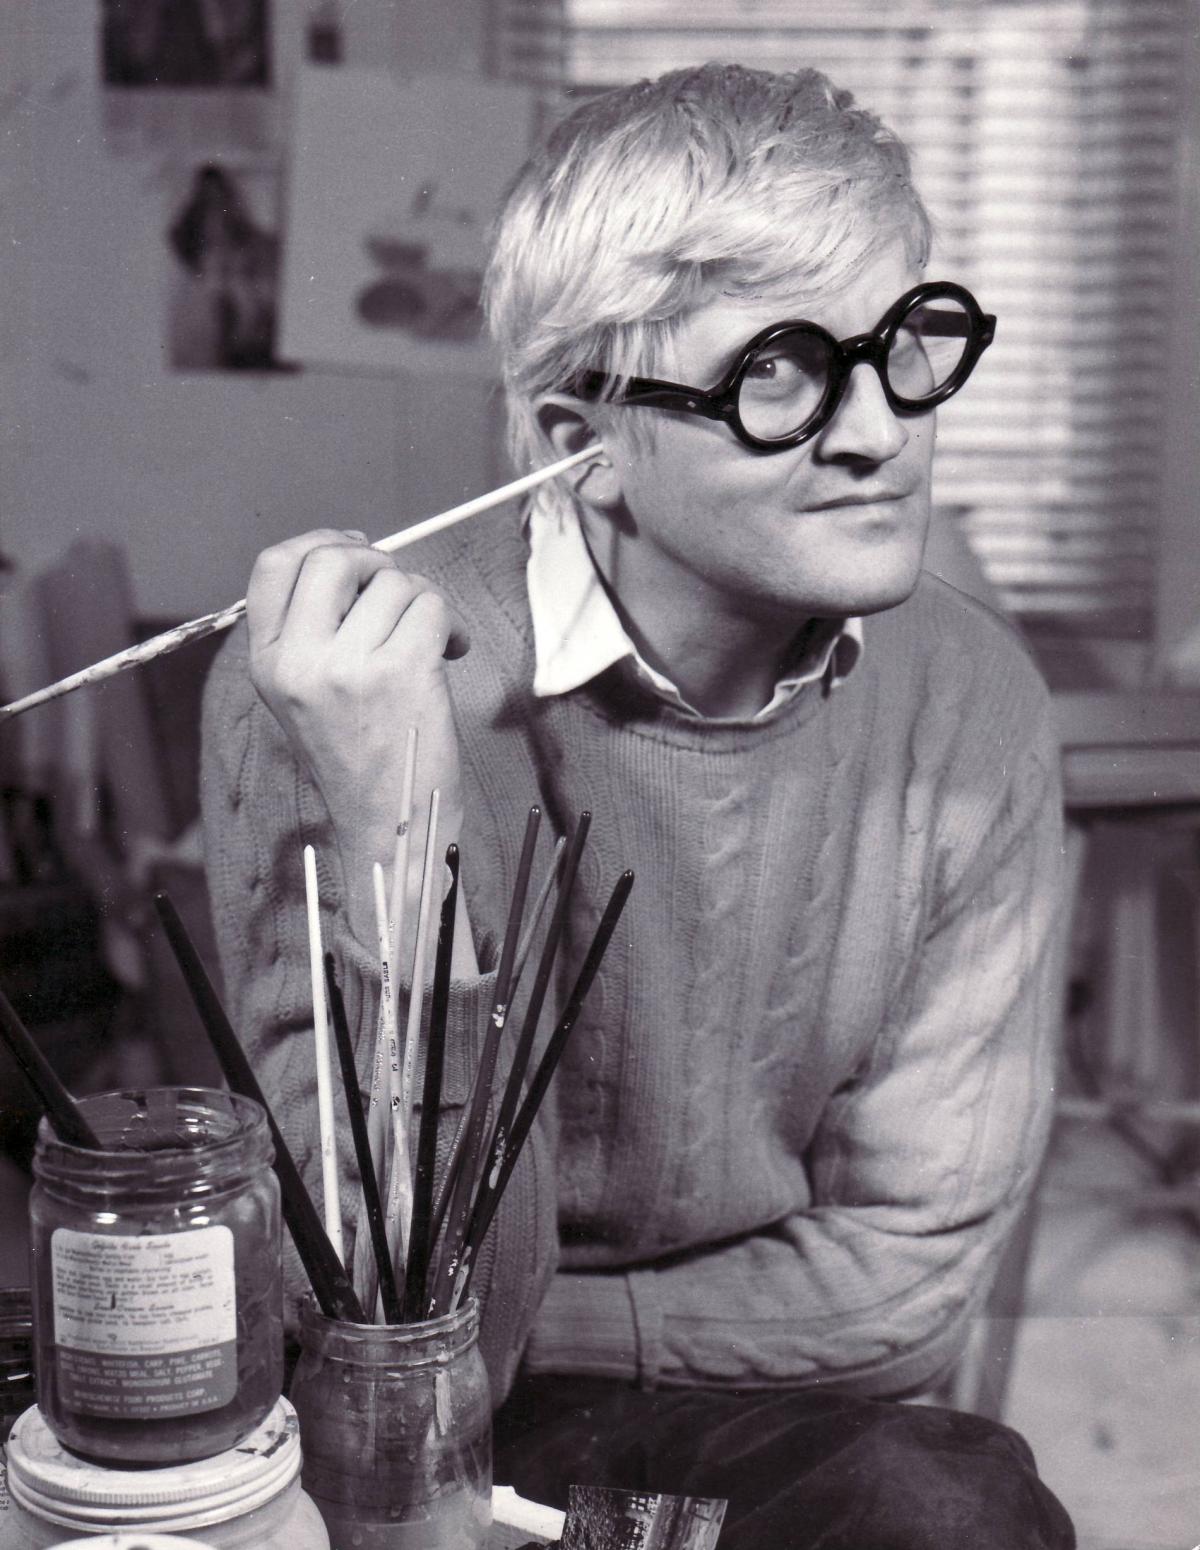 Pictures of David Hockney and his work over the years